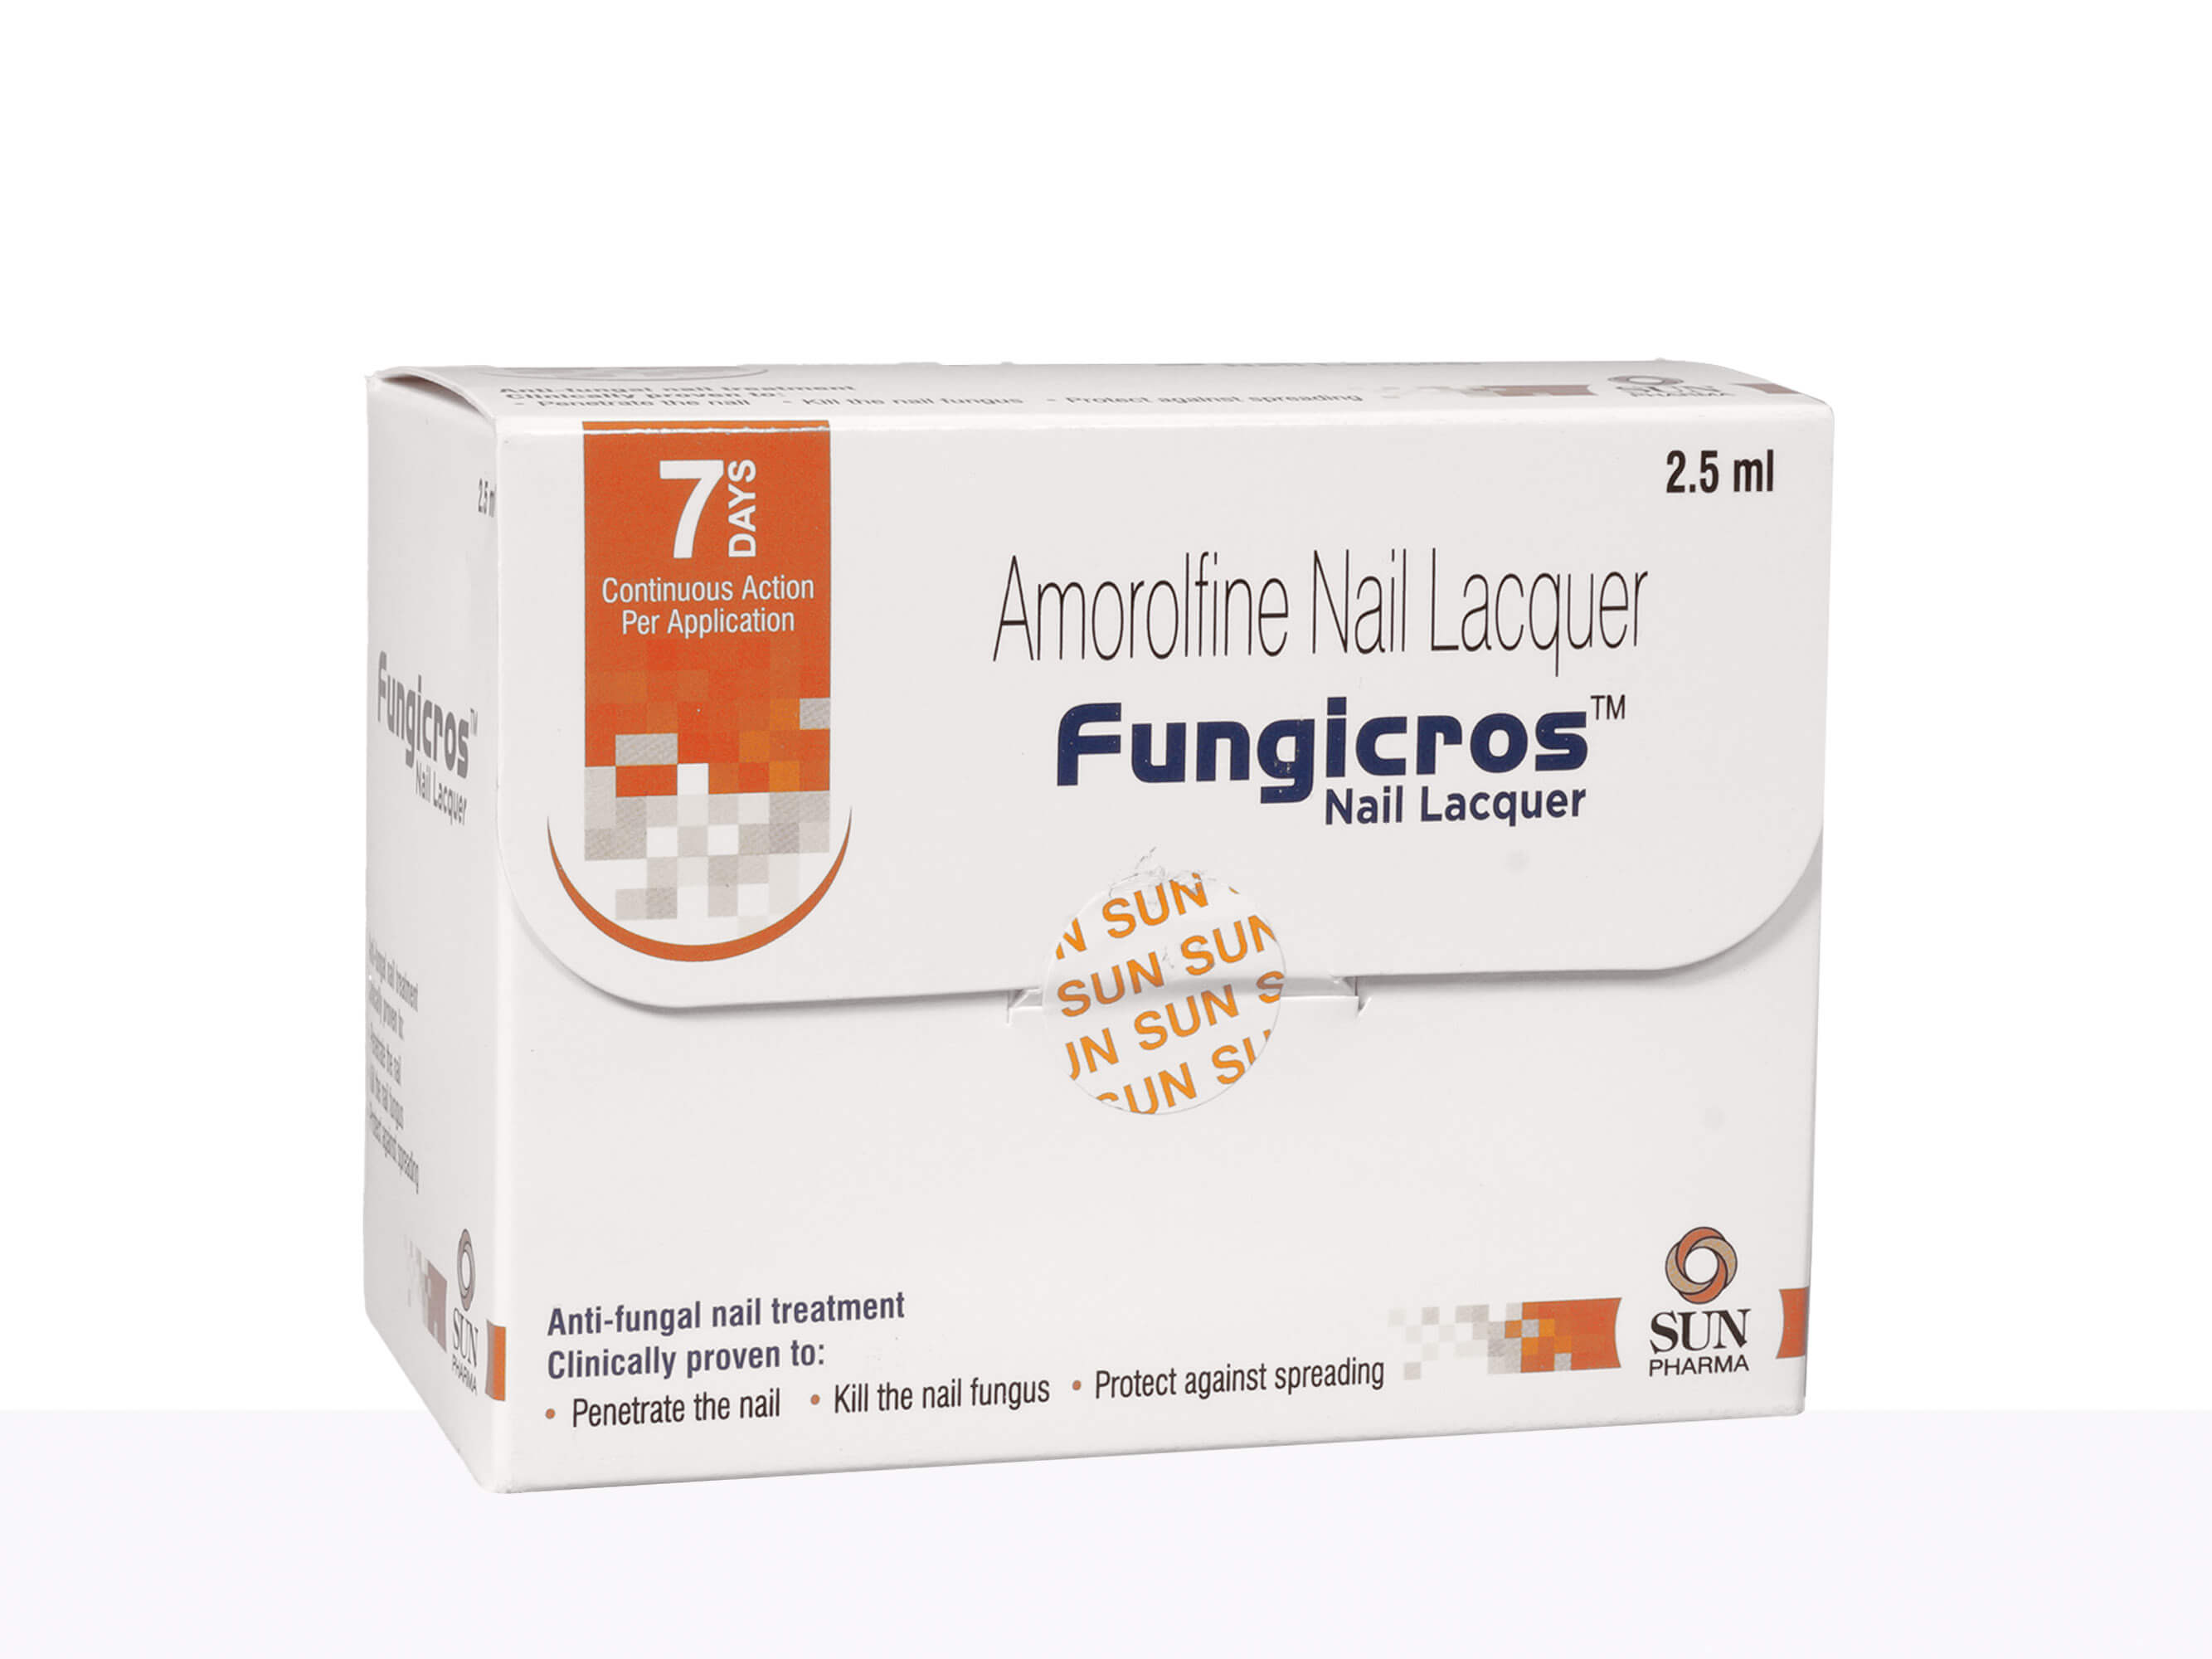 Buy FUNGICROS Nail Lacquer 2.5ml Online at Upto 25% OFF | Netmeds